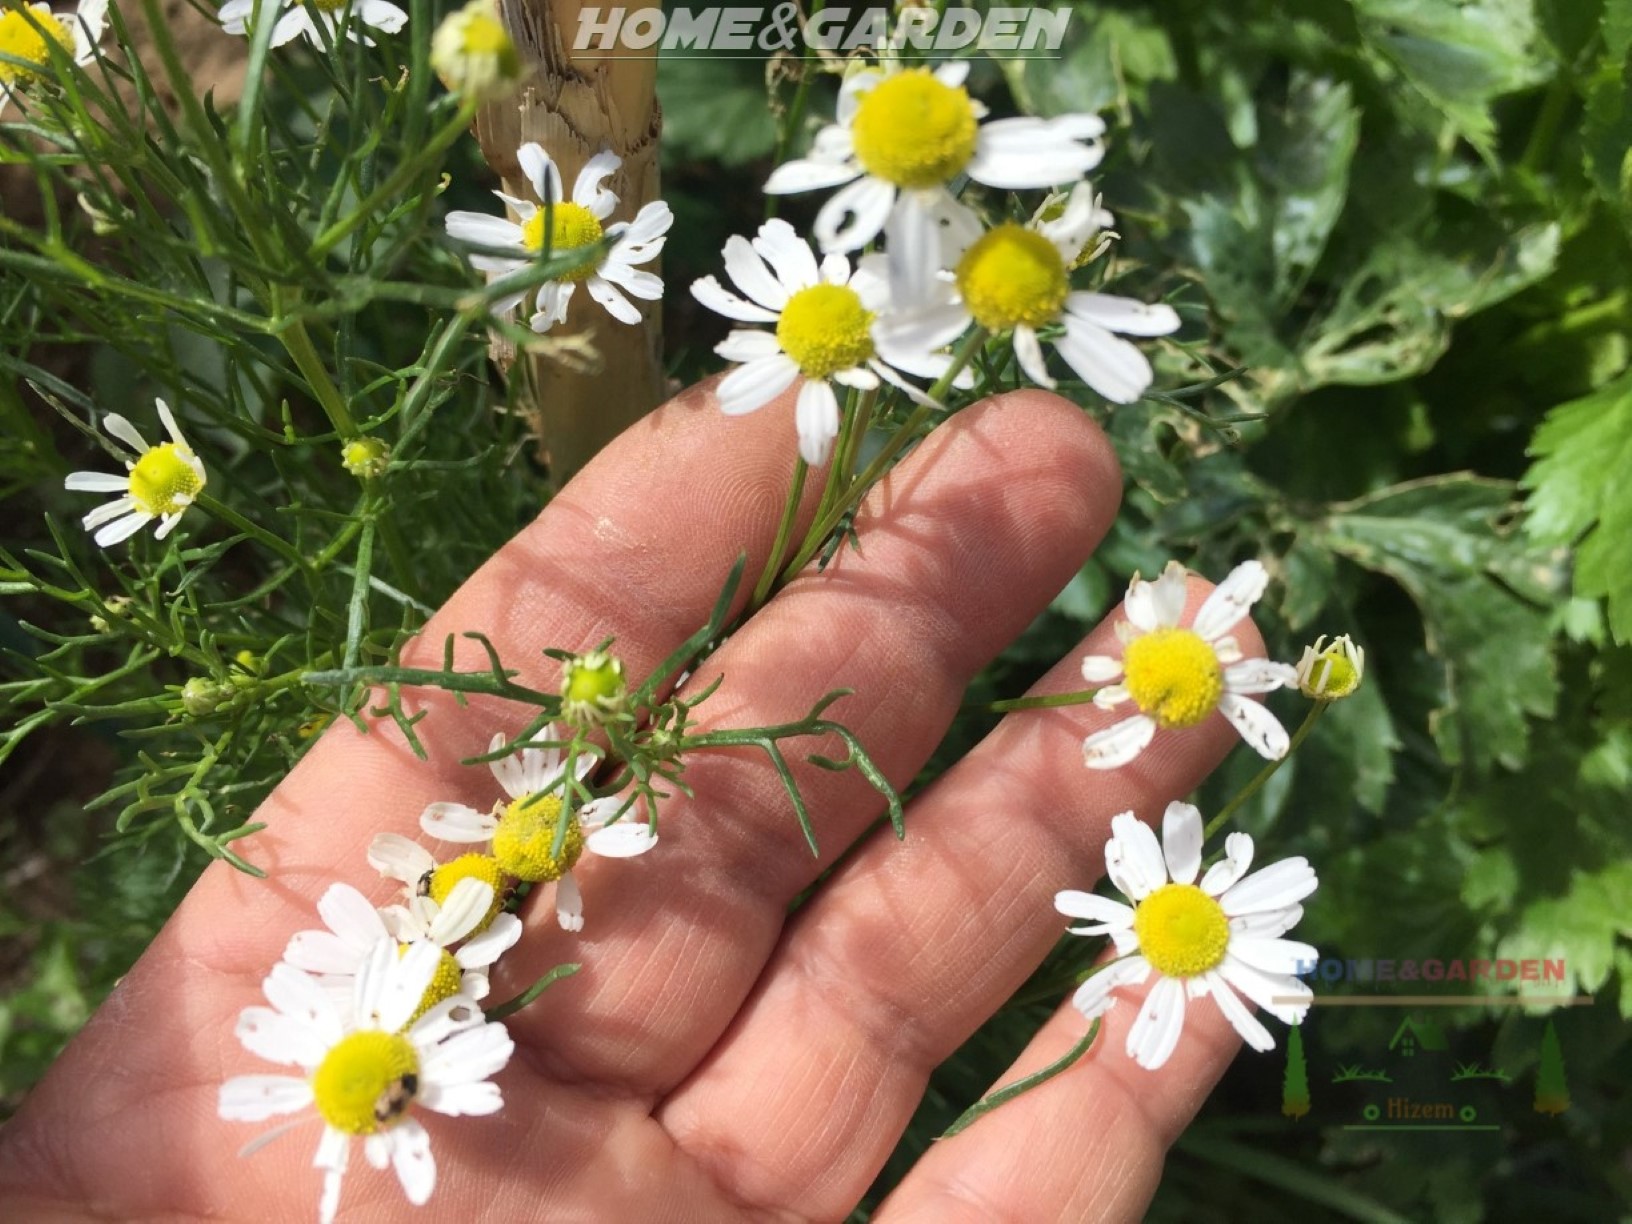 Companion planting chamomile with tomatoes, improves the health and flavour of your tomatoes, and deter pests too.